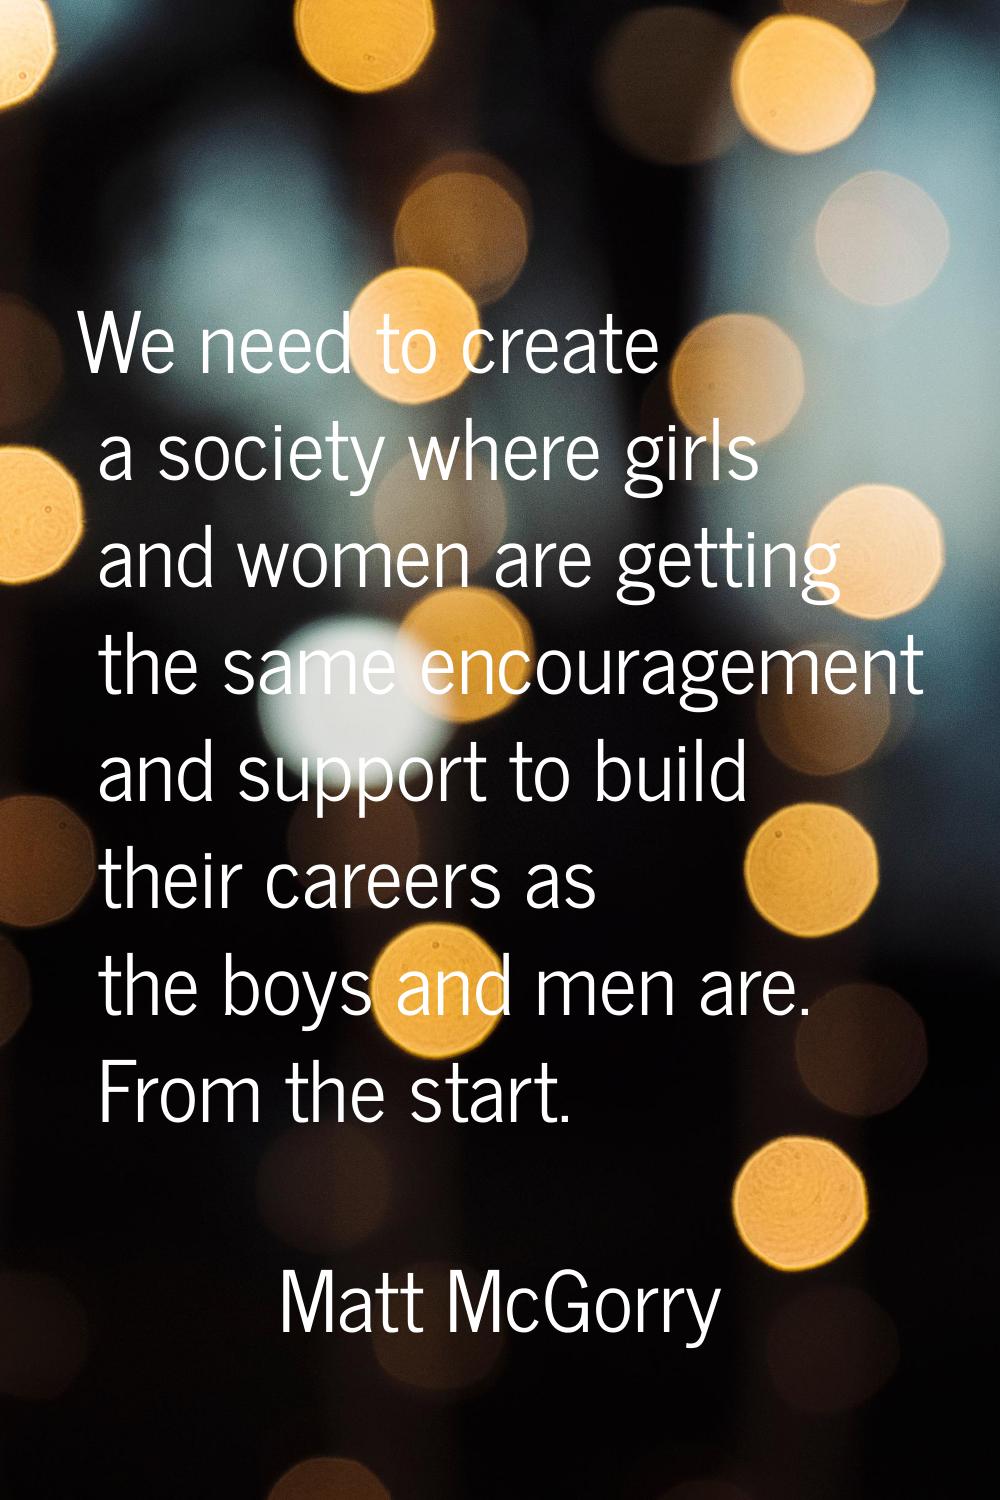 We need to create a society where girls and women are getting the same encouragement and support to